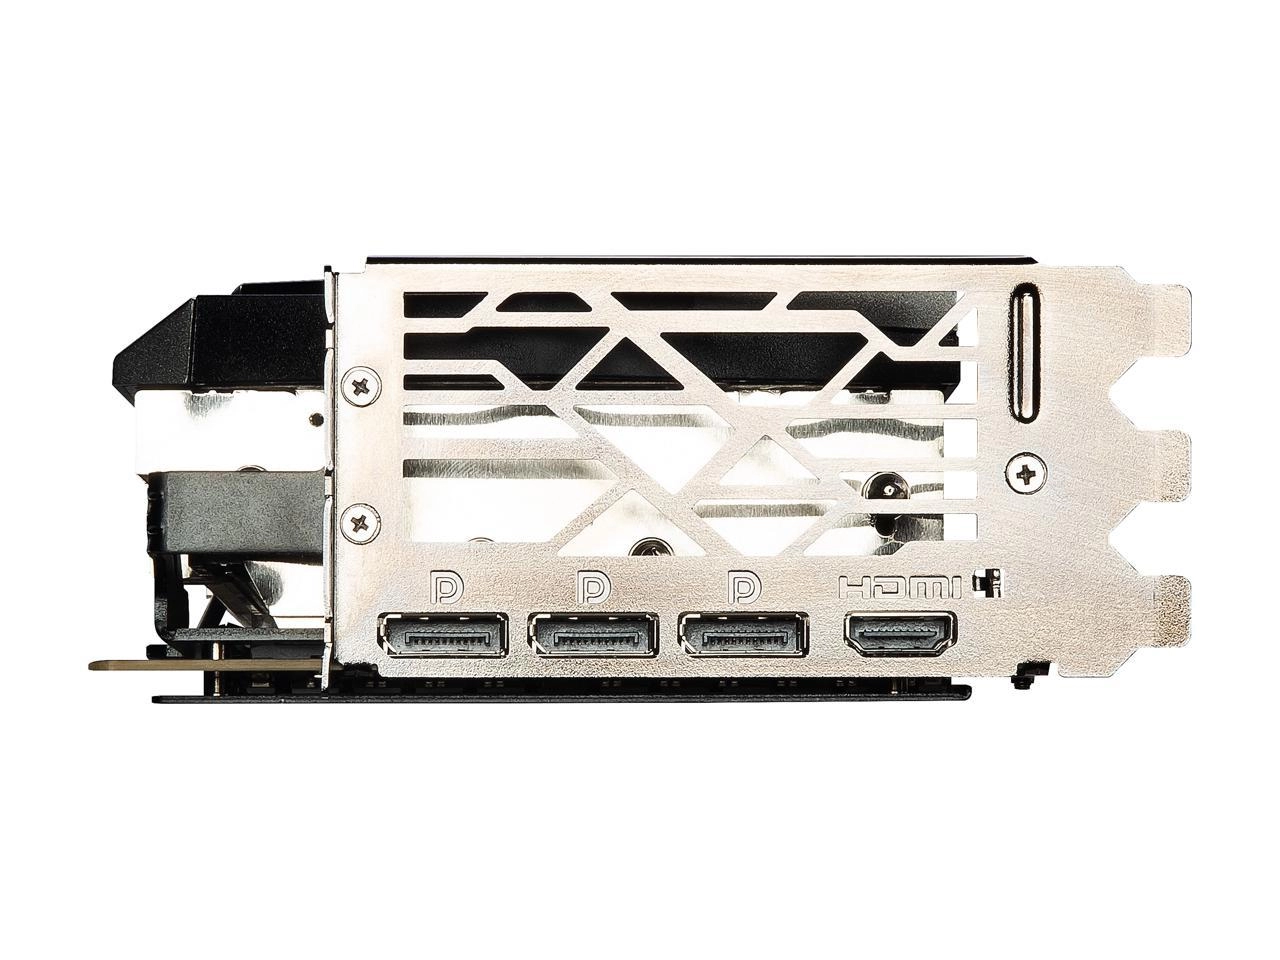 MSI GeForce RTX 3090 Ti GAMING X TRIO 24G Left Side View